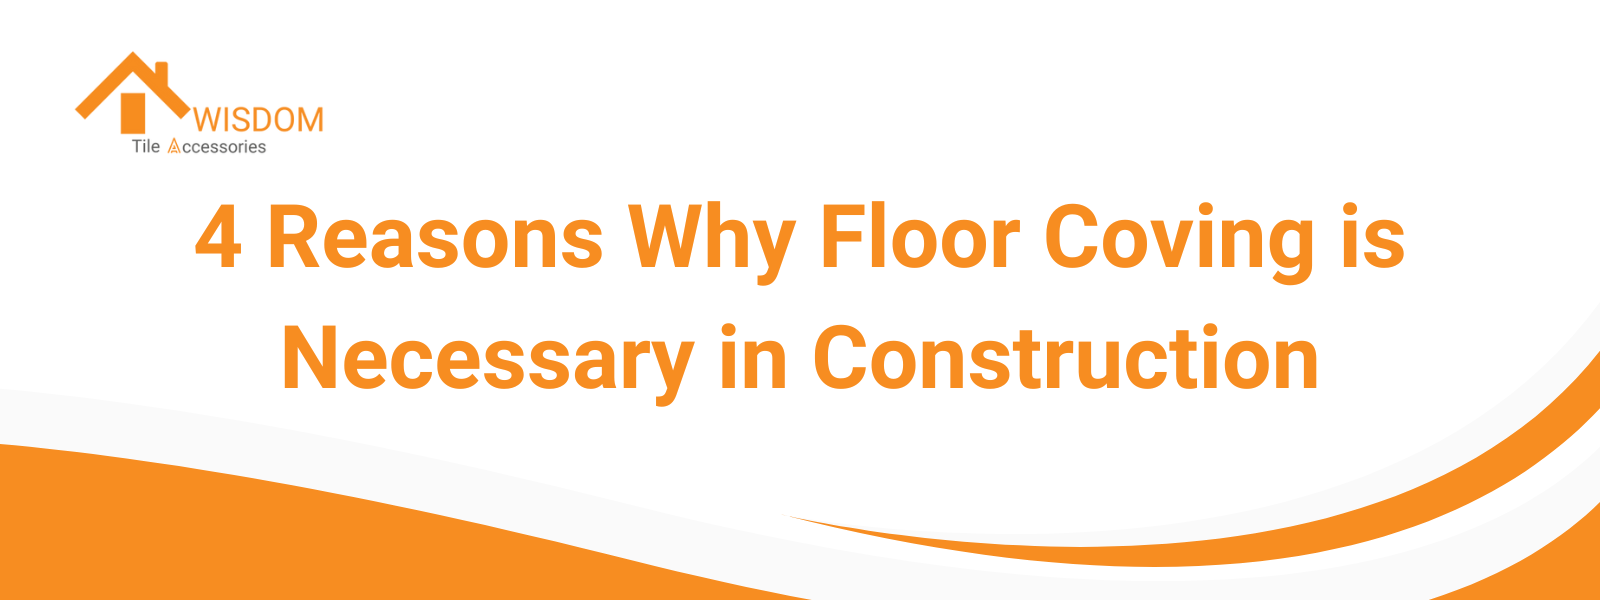 4 Reasons Why Floor Coving is Necessary in Construction